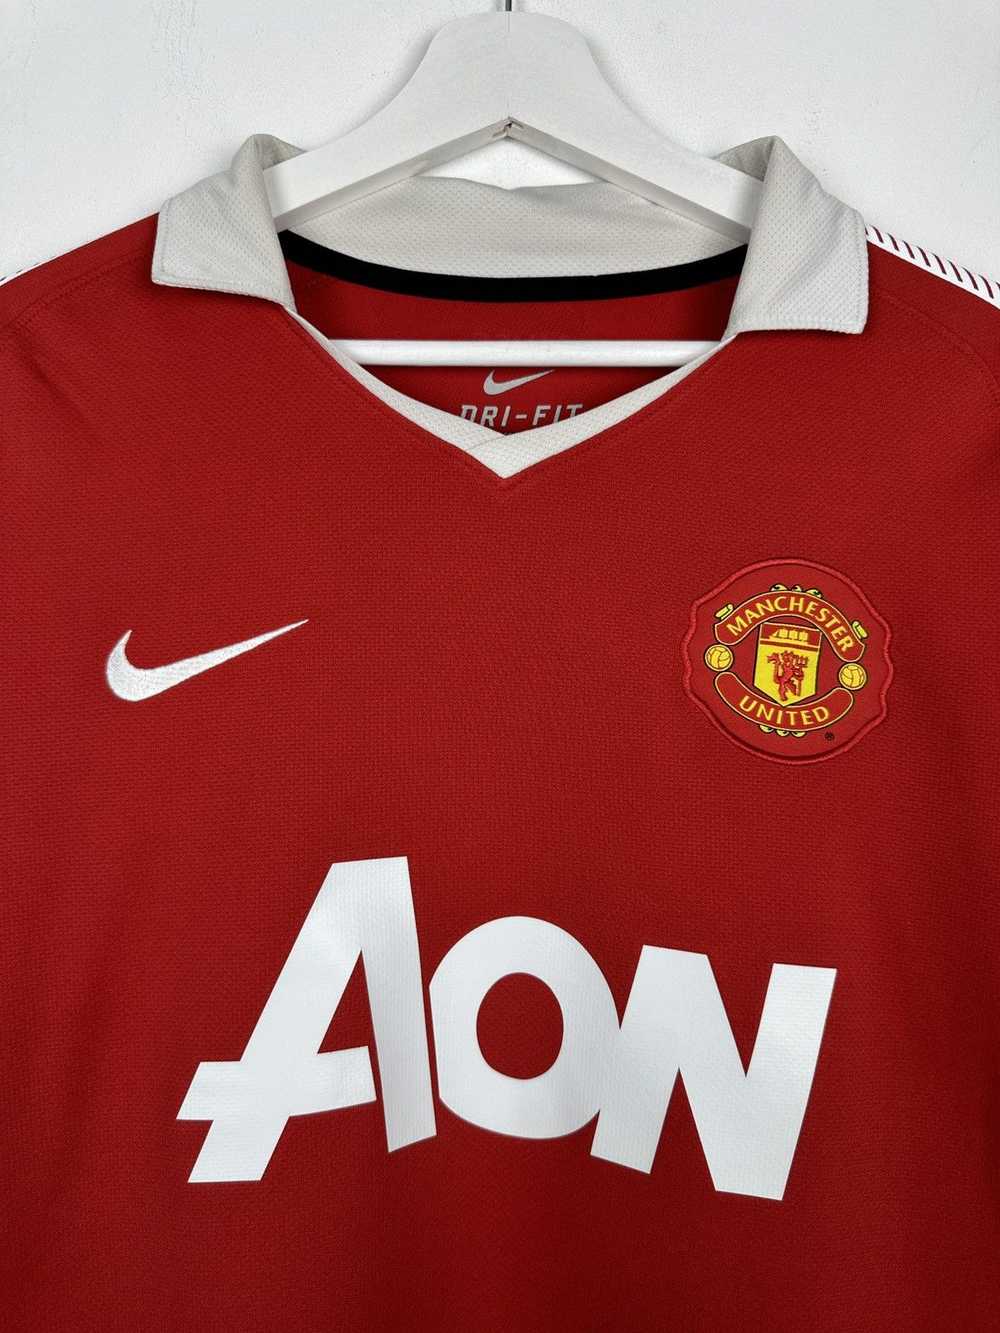 Jersey × Nike × Soccer Jersey #10 Rooney Manchest… - image 5